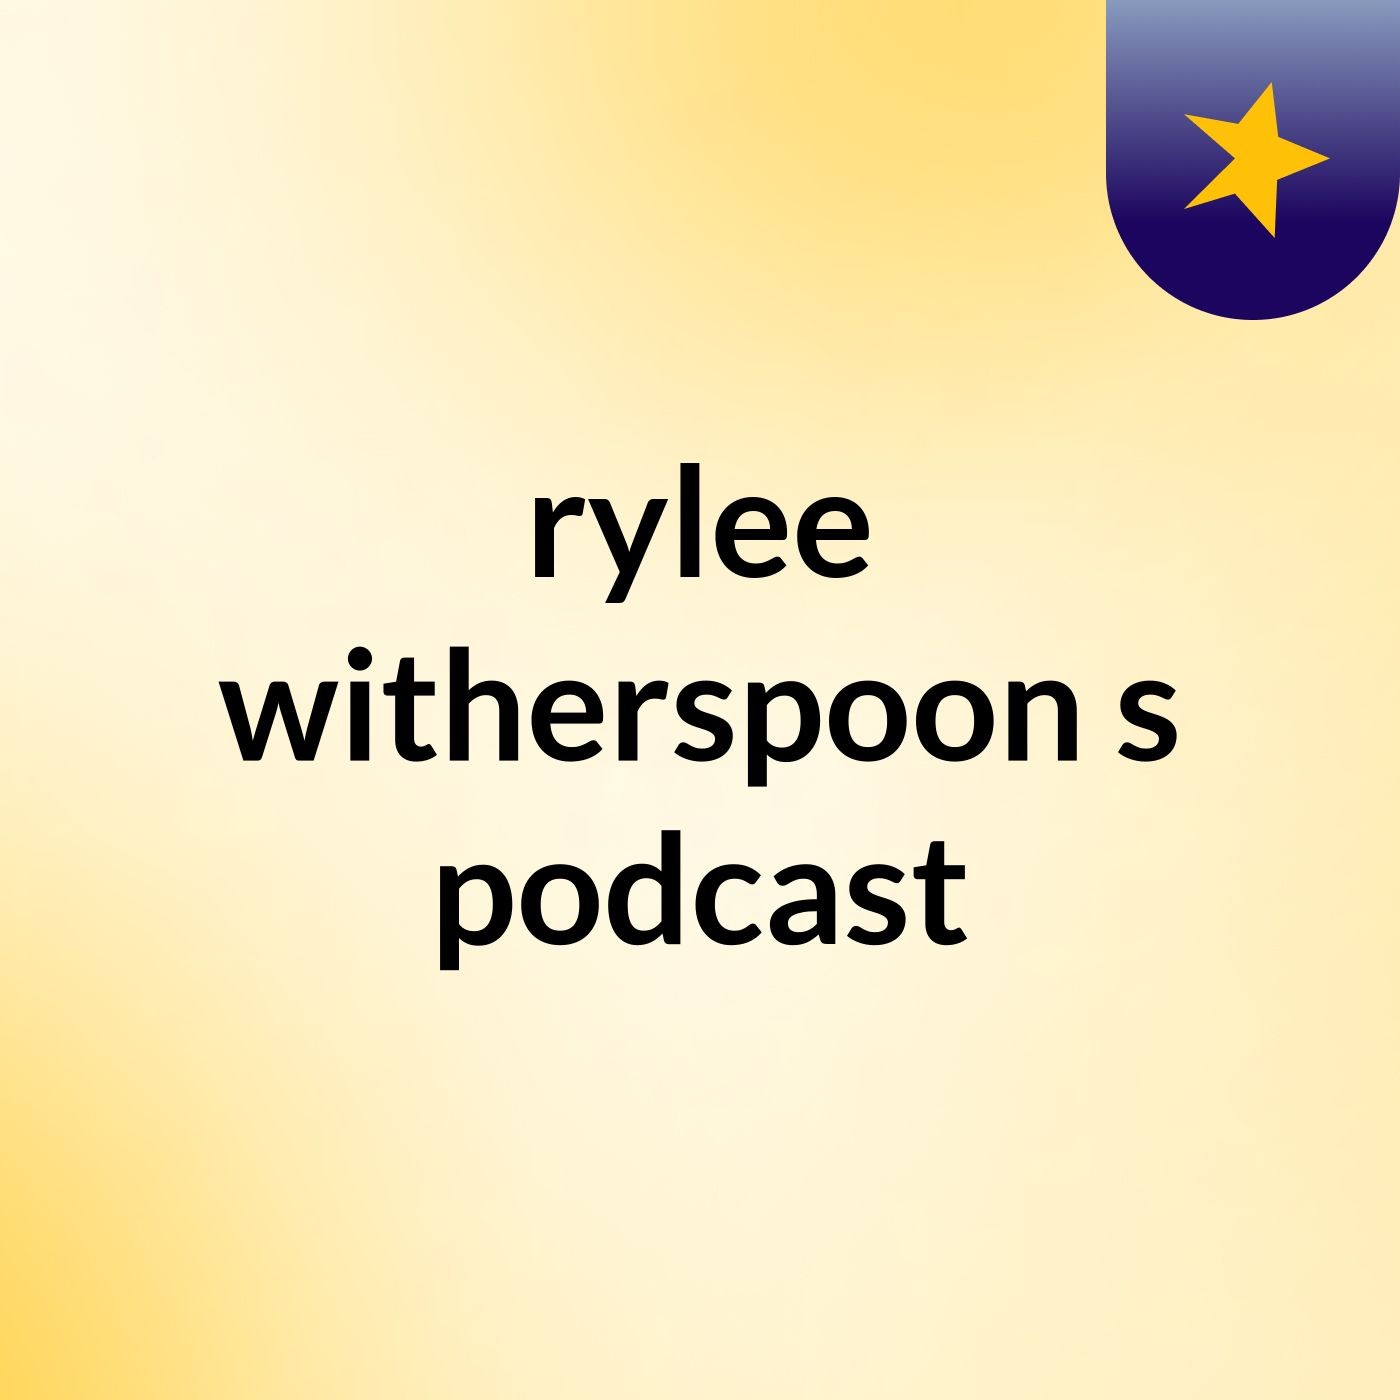 Episode 2 - rylee witherspoon's podcast